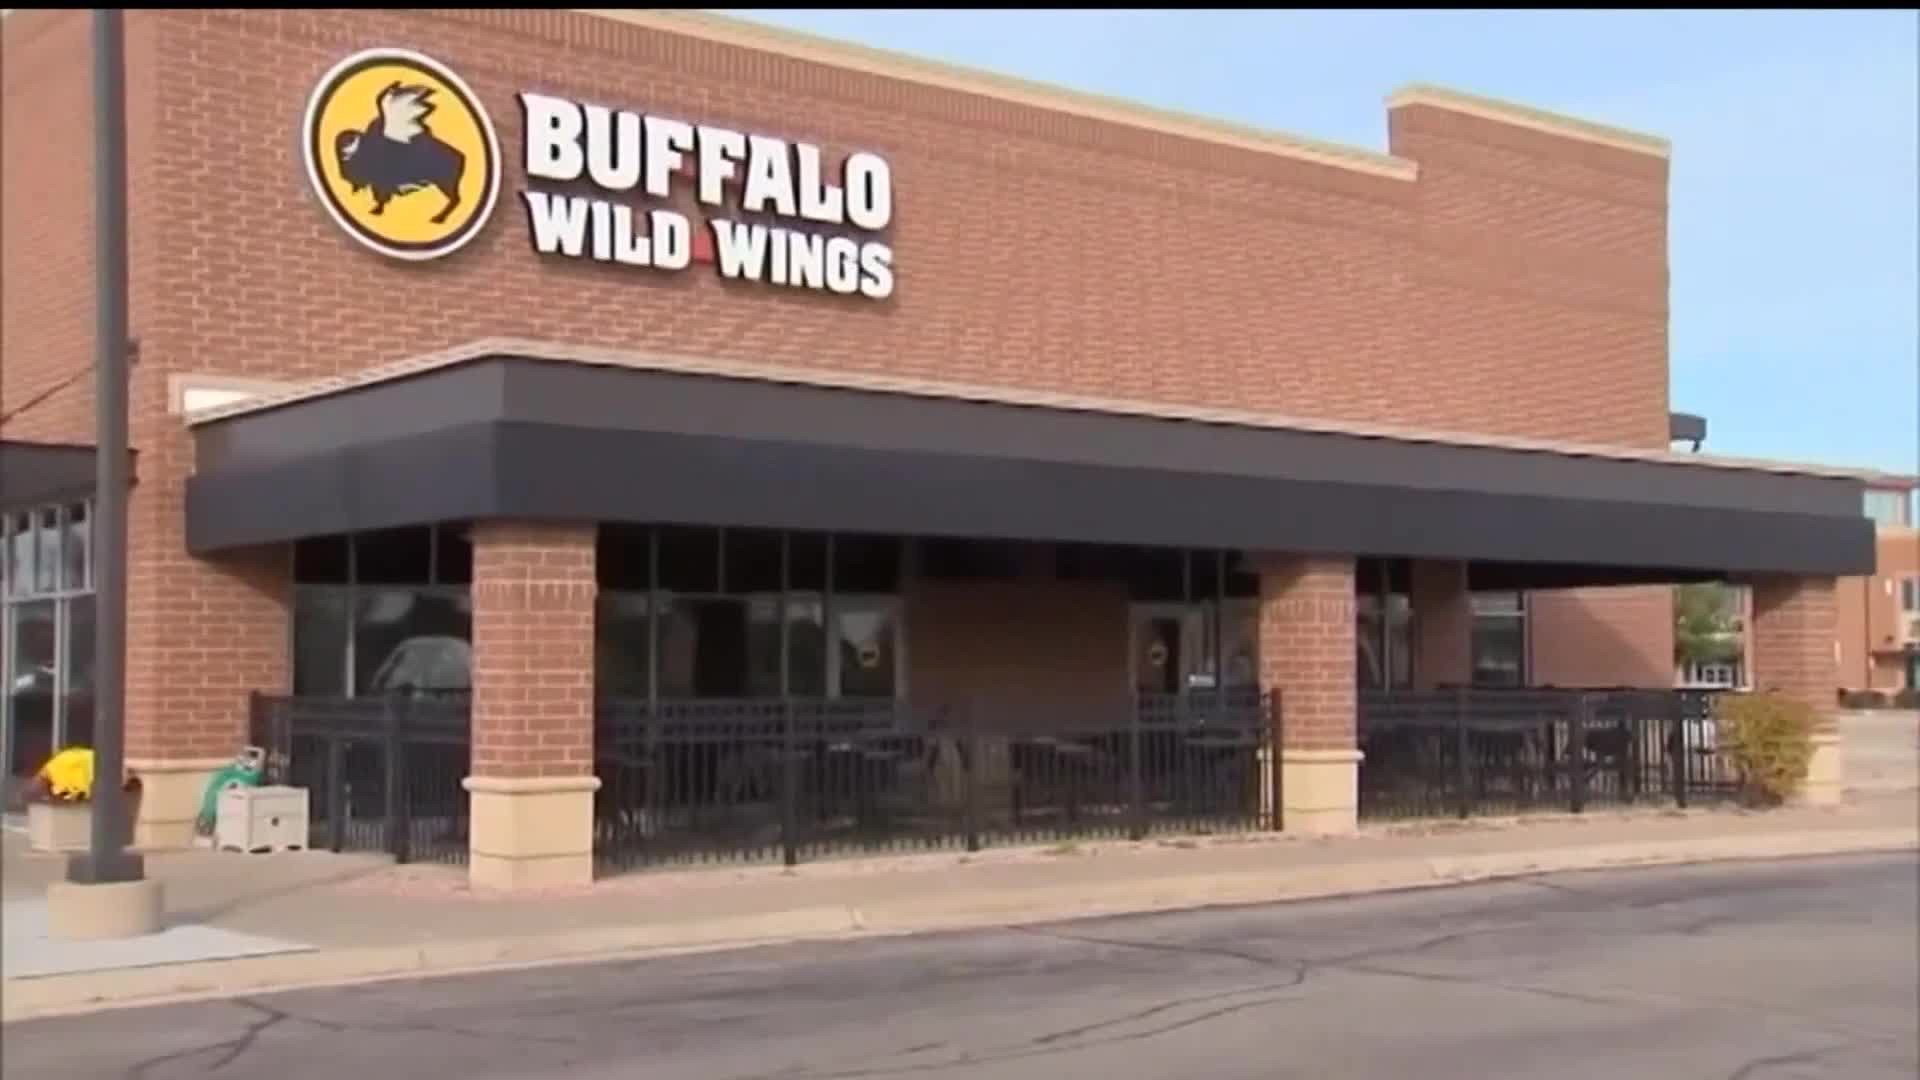 Buffalo Wild Wings: Suburban Chicago workers fired over skin color reseat bid